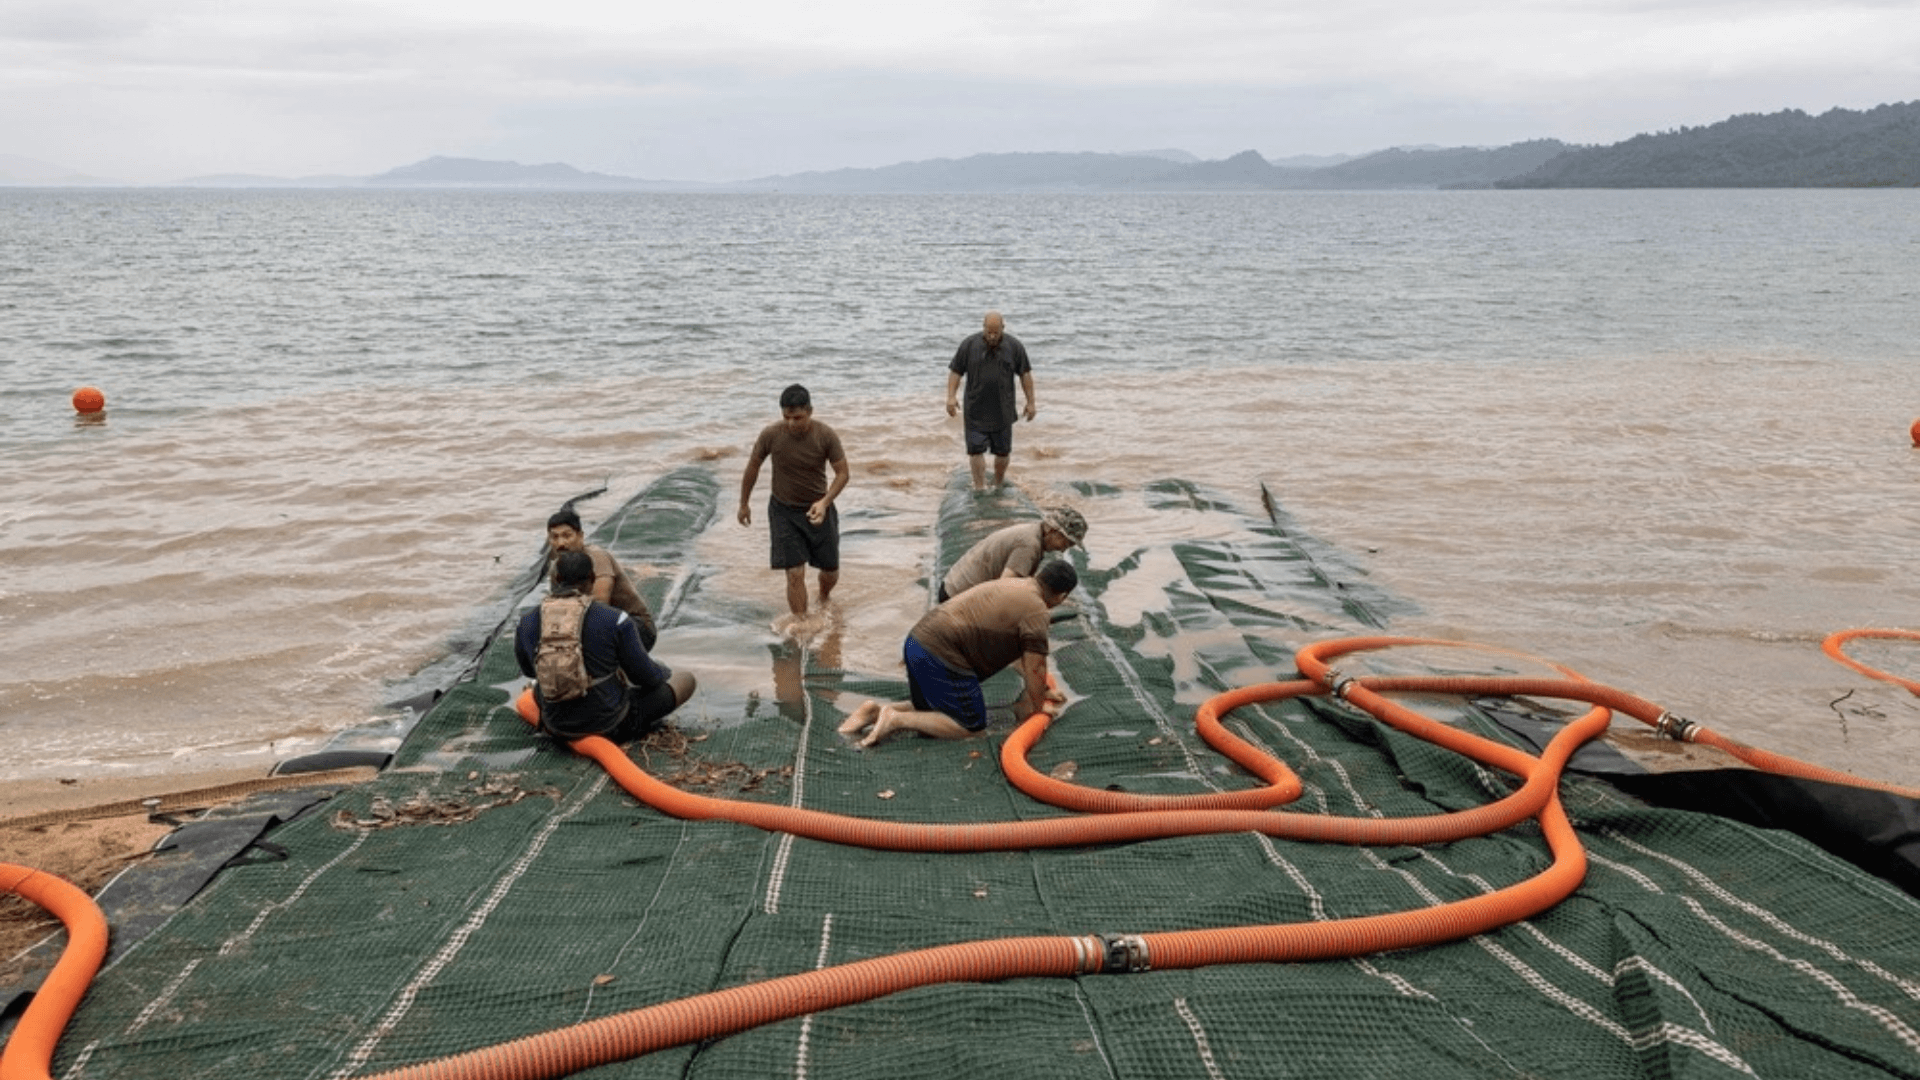 Submersible matting uses indigenous materials to create a stable roadway system across the littoral zone to bridge the gap between low- and high-tide at the beach